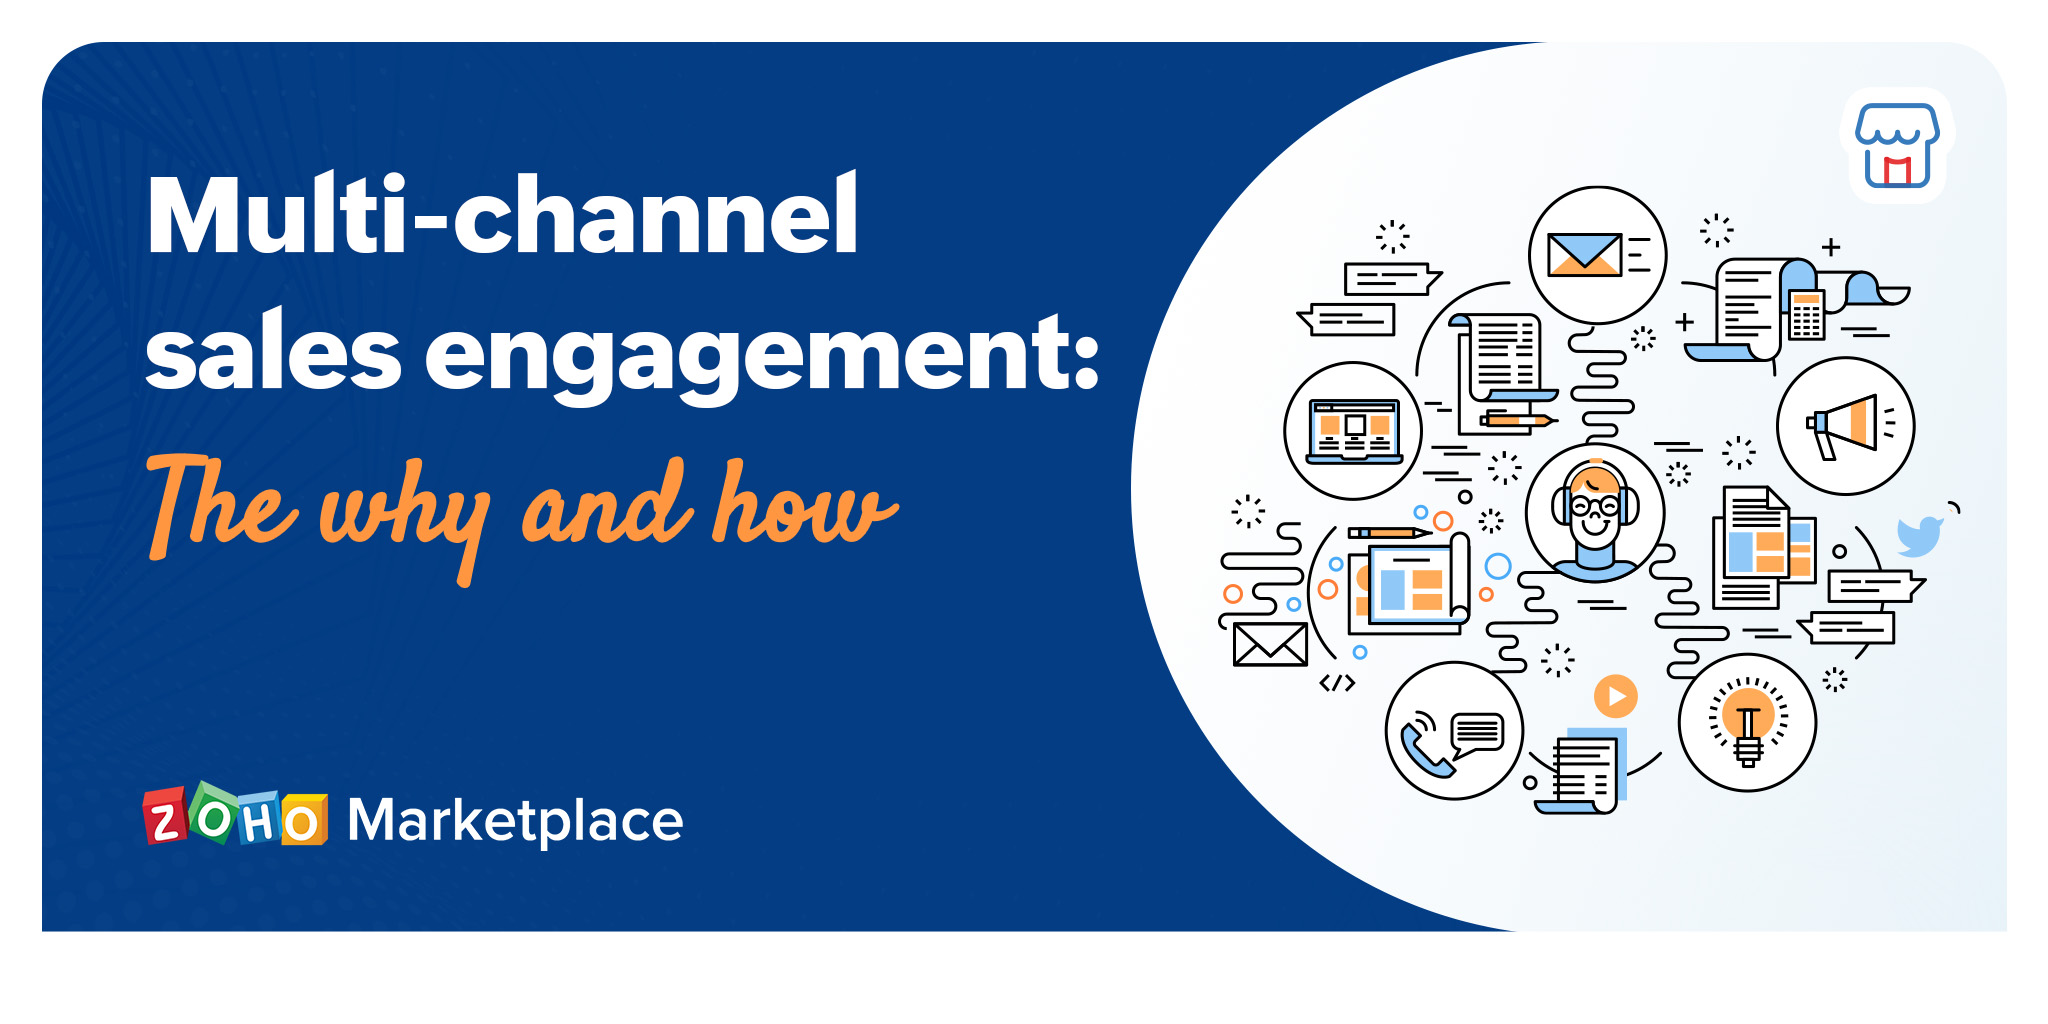 Multi-channel sales engagement: The why and how